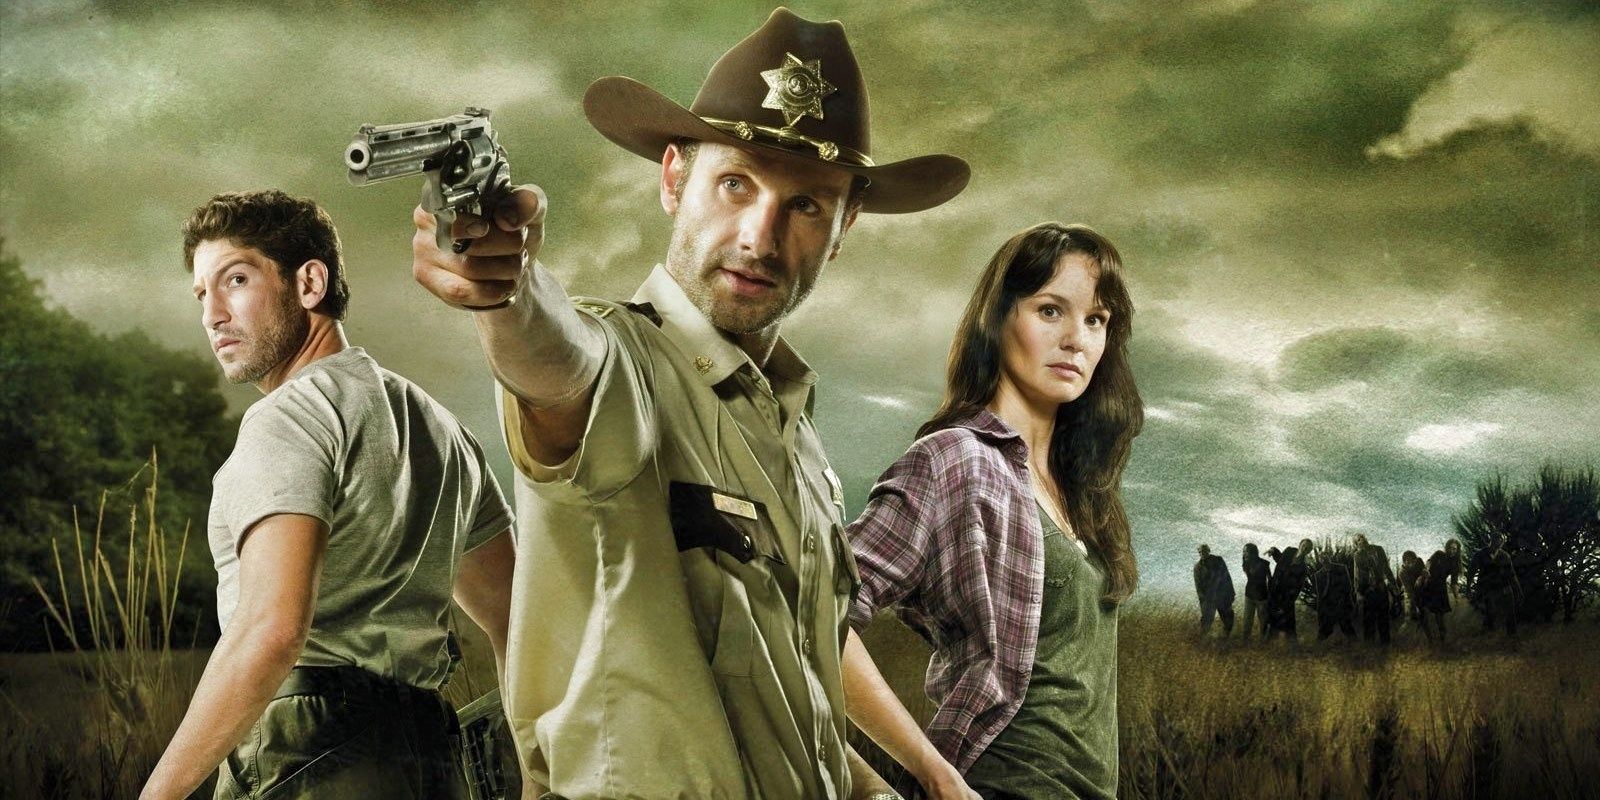 A promo poster from the first season of The Walking Dead, showing Rick in uniform, and Shane and Lori behind him.